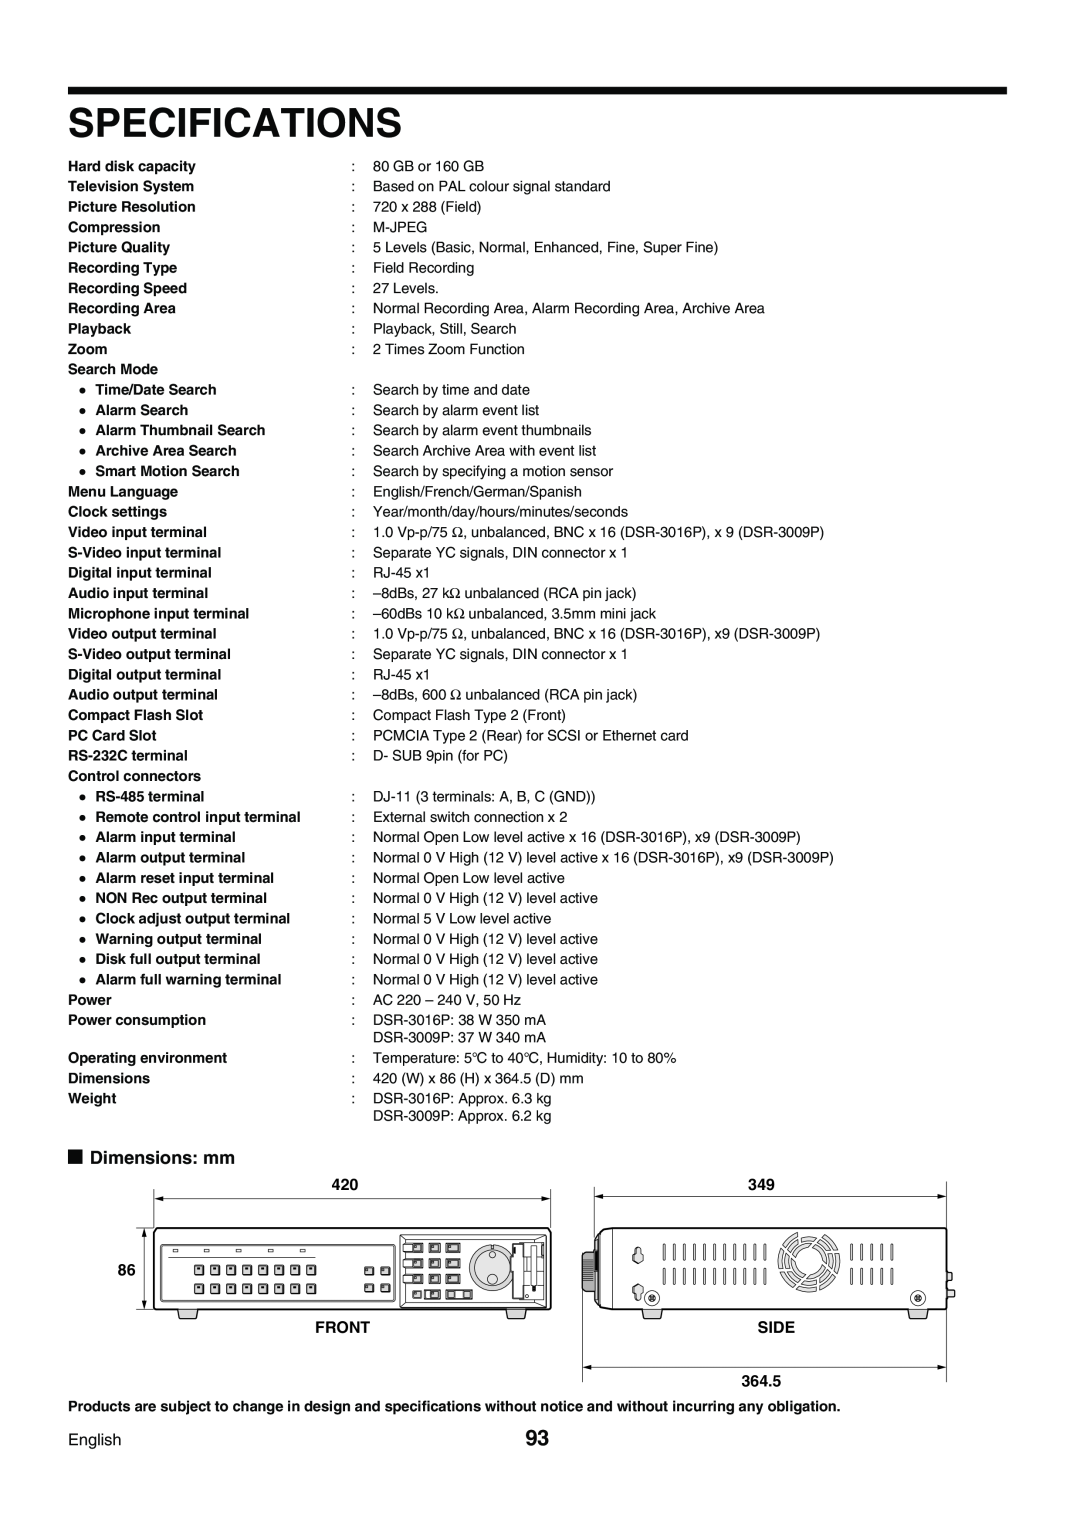 Sanyo DSR-3009P instruction manual Specifications, Dimensions mm, Front, SIDE 364.5 